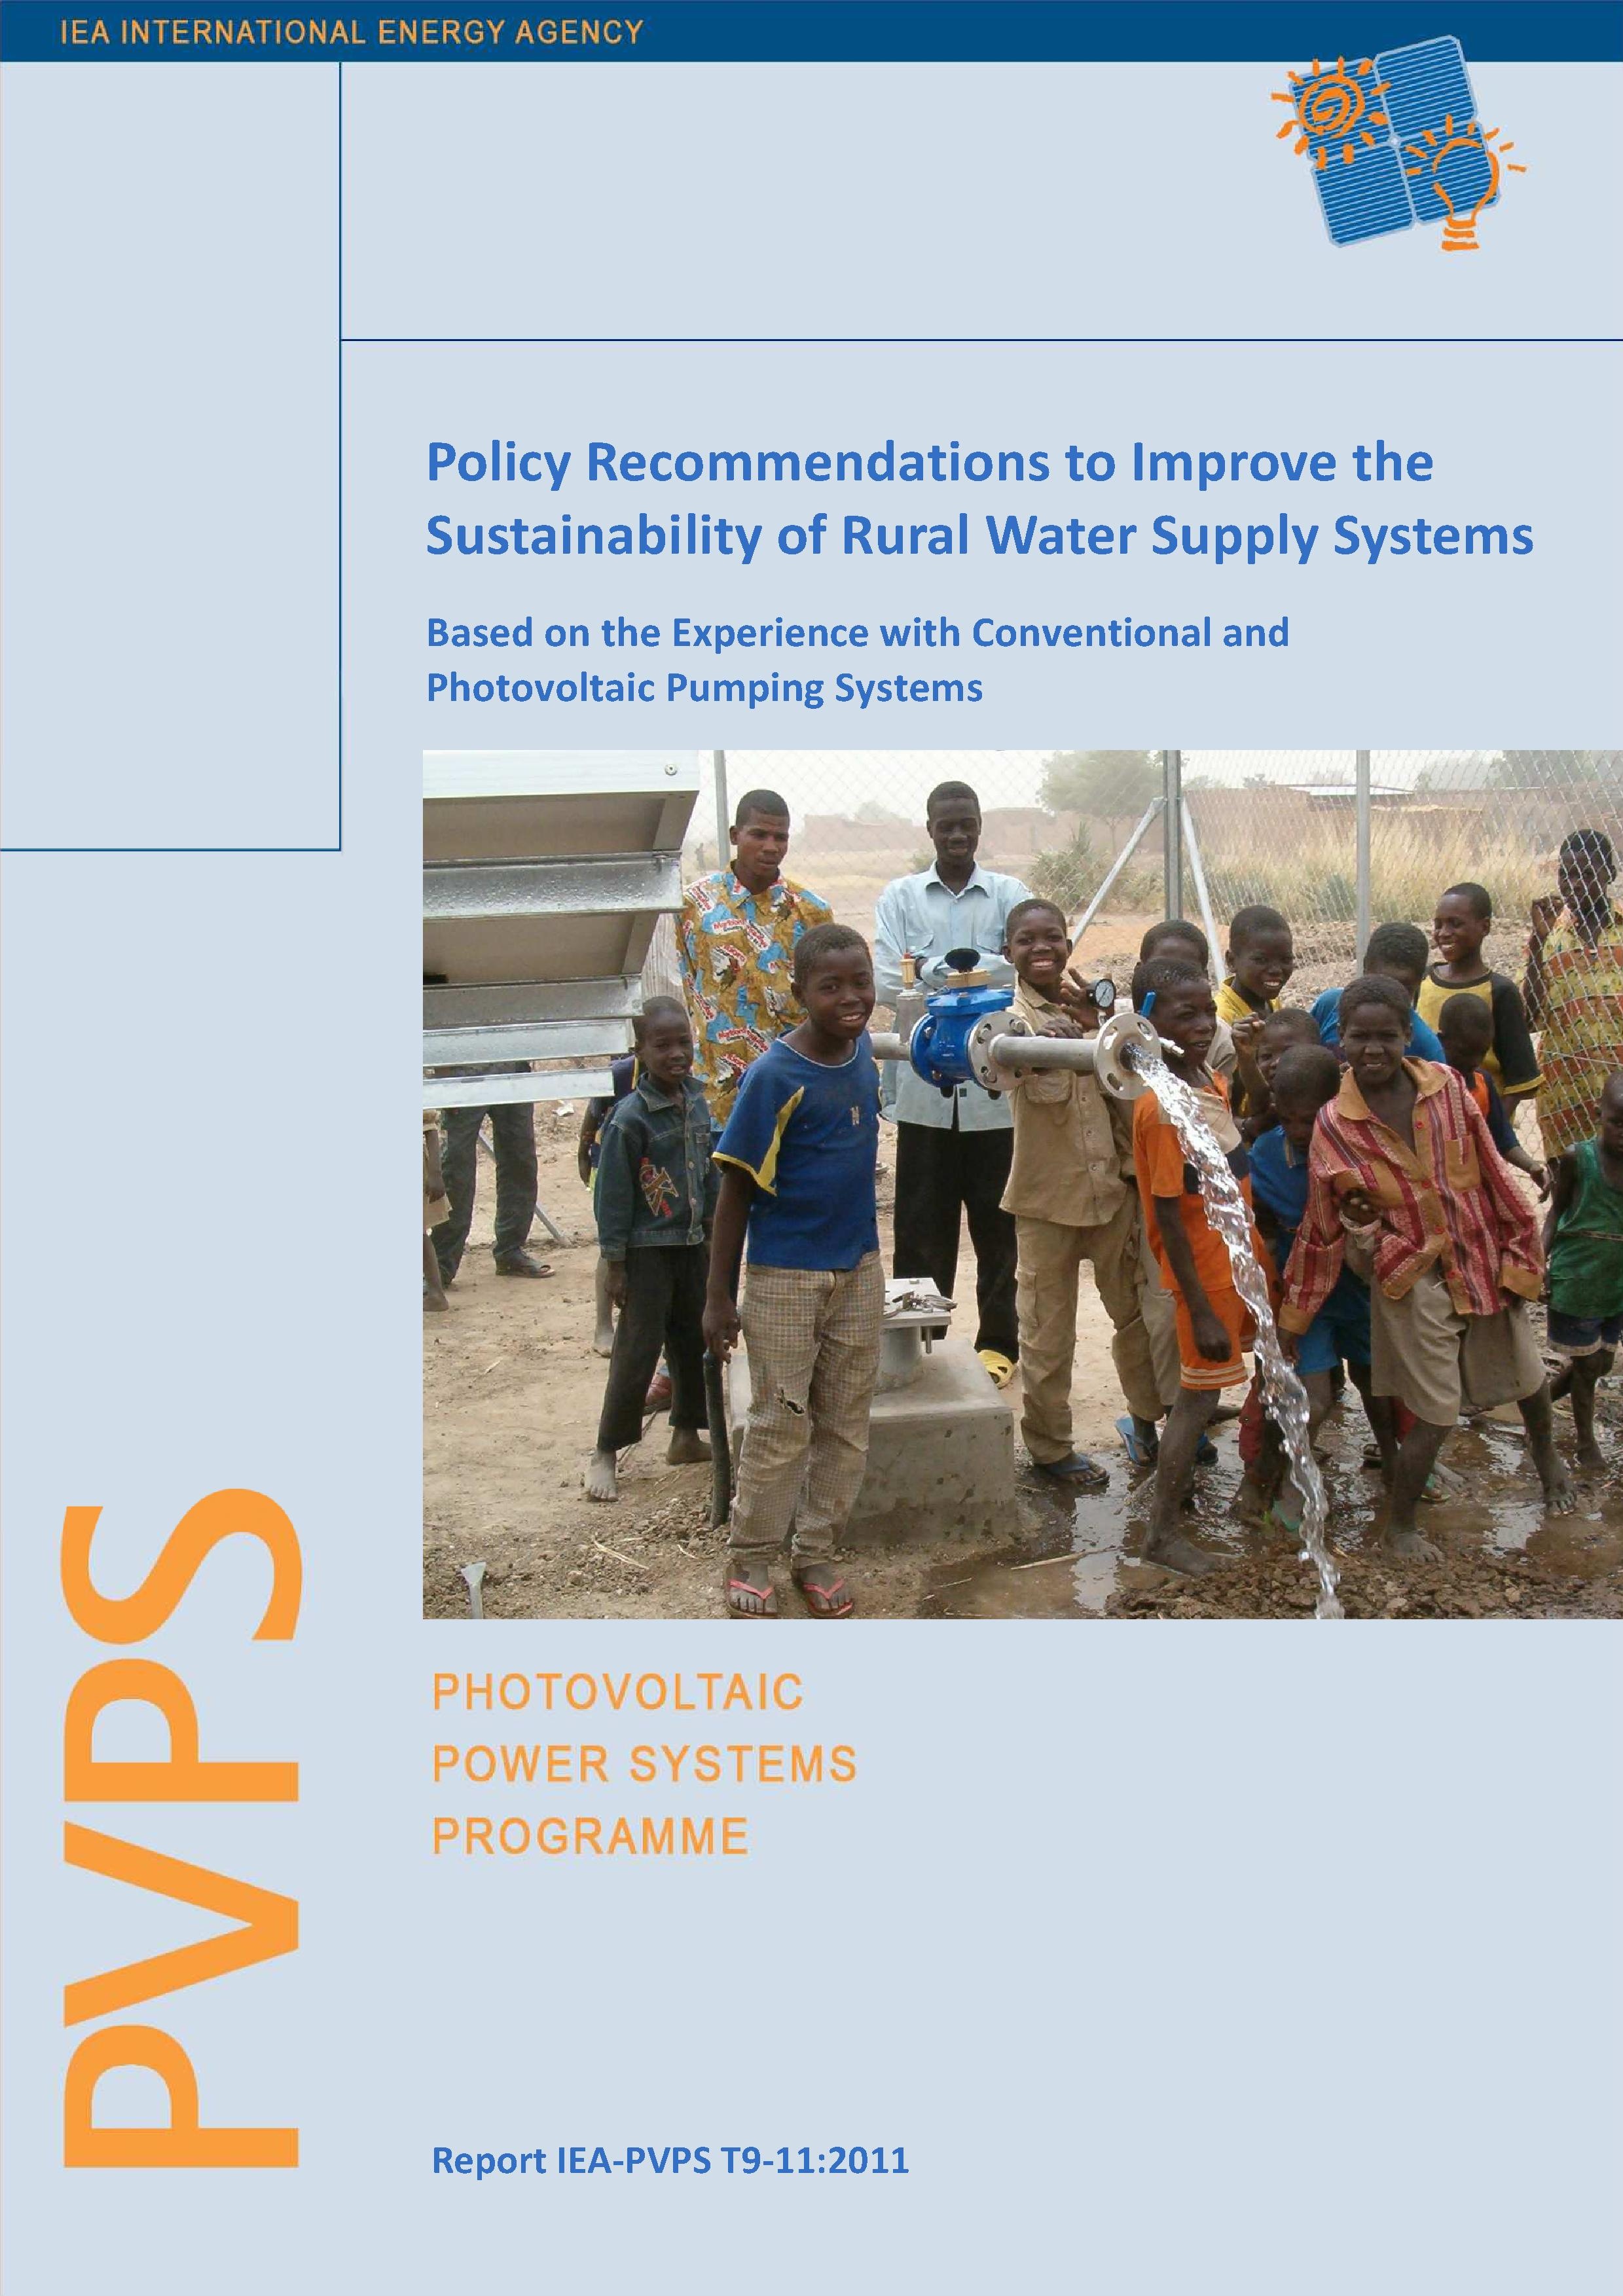 Policy Recommendations to Improve the Sustainability of Rural Water Supply Systems